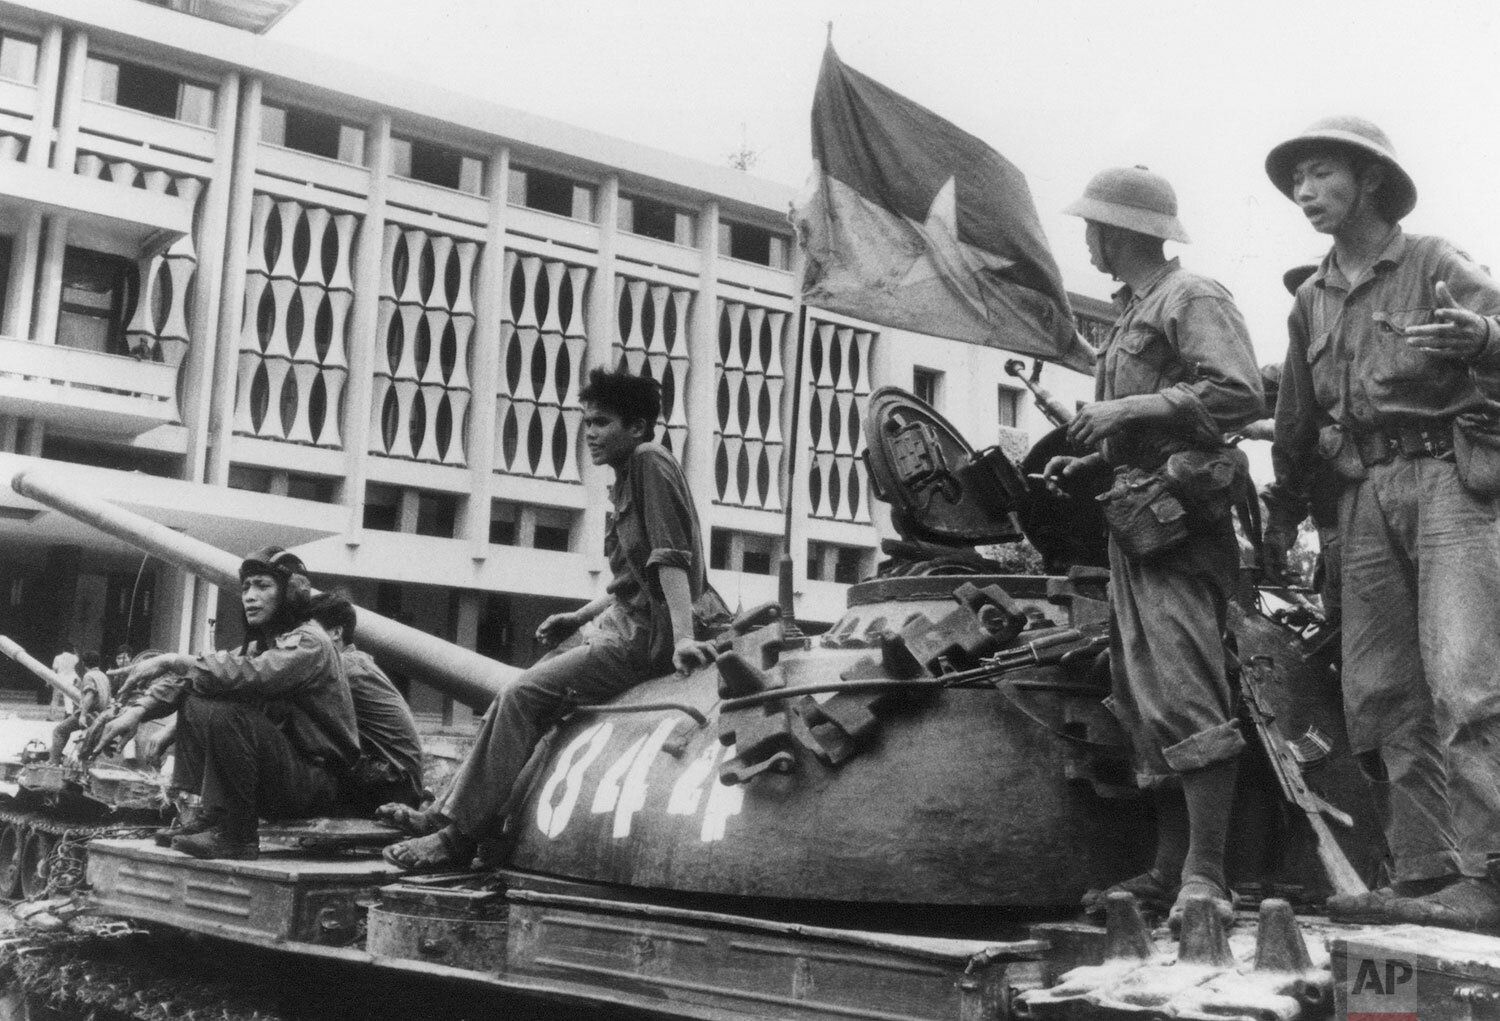  Provisional Revolutionary Government (PRG) forces enter Saigon and are seen parked outside the Independence Palace on April 30, 1975, minutes after the unconditional surrender of a Vietnam. (AP Photo) 